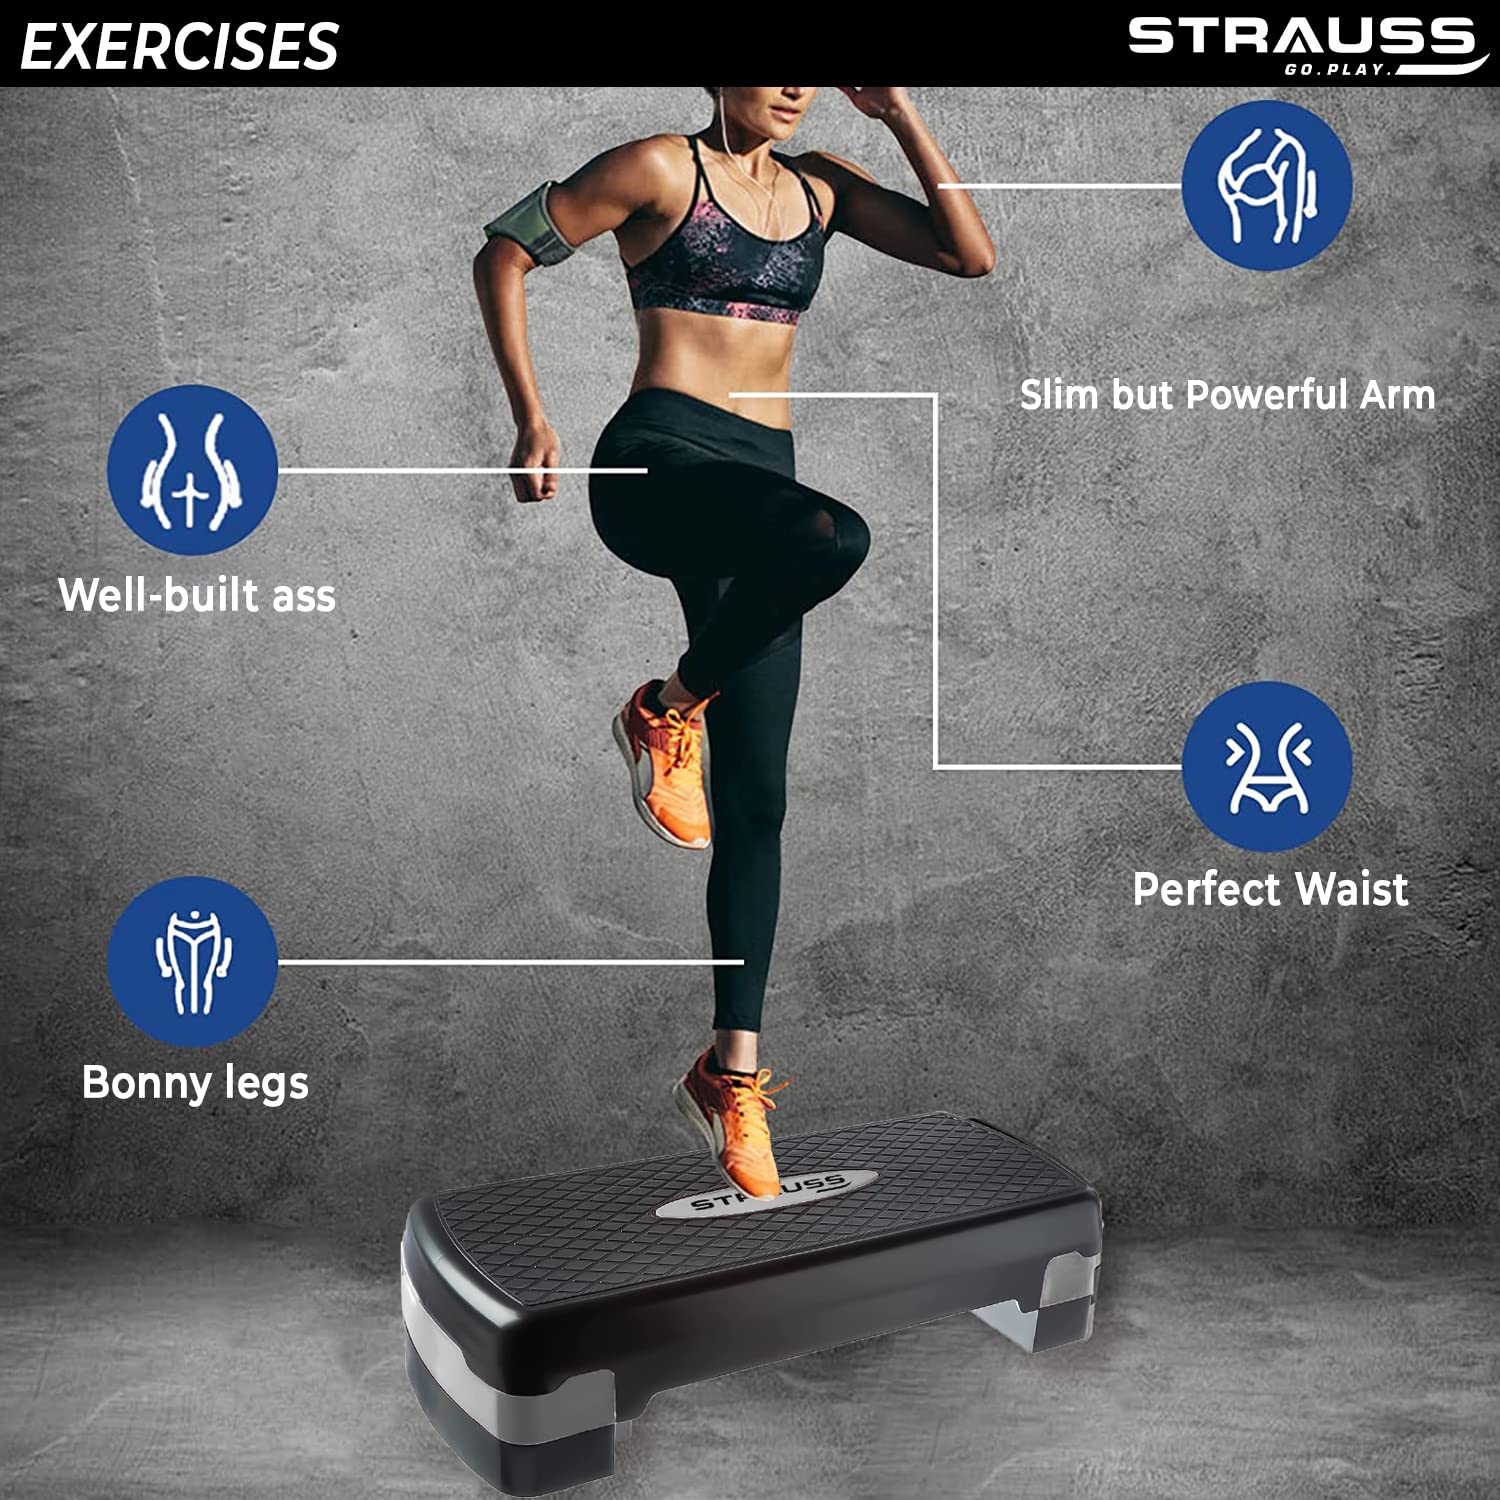 Strauss Aerobic Stepper | Two Height Level Adjustments - 4 inches and 6 inches | Slip-Resistant & Shock Absorbing Platform for Extra-Durability - Supports Upto 200 KG, (Grey)